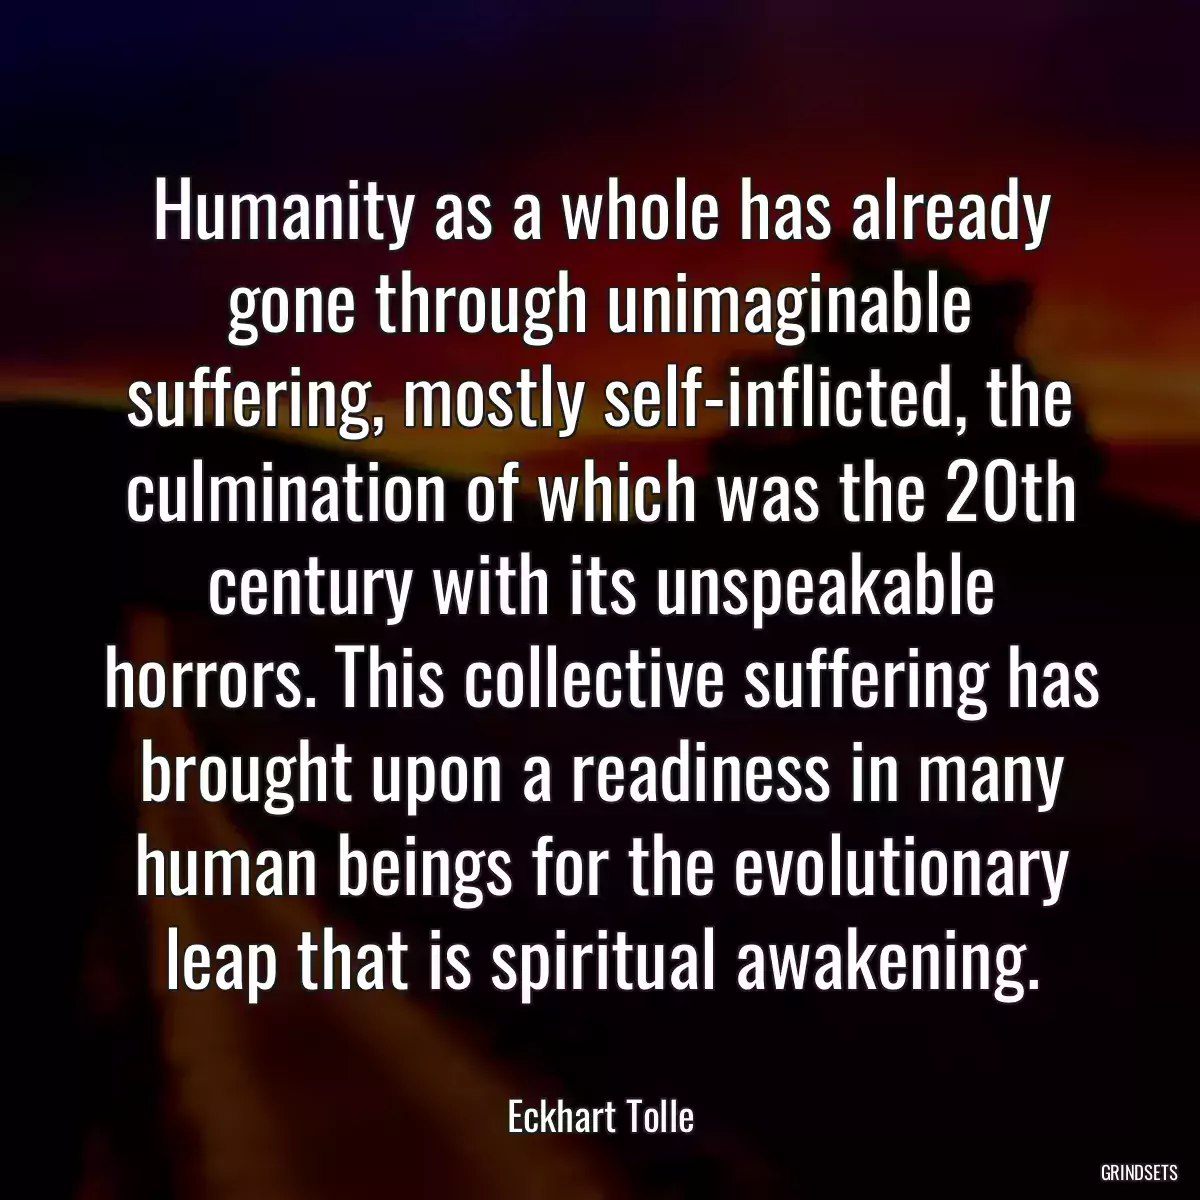 Humanity as a whole has already gone through unimaginable suffering, mostly self-inflicted, the culmination of which was the 20th century with its unspeakable horrors. This collective suffering has brought upon a readiness in many human beings for the evolutionary leap that is spiritual awakening.